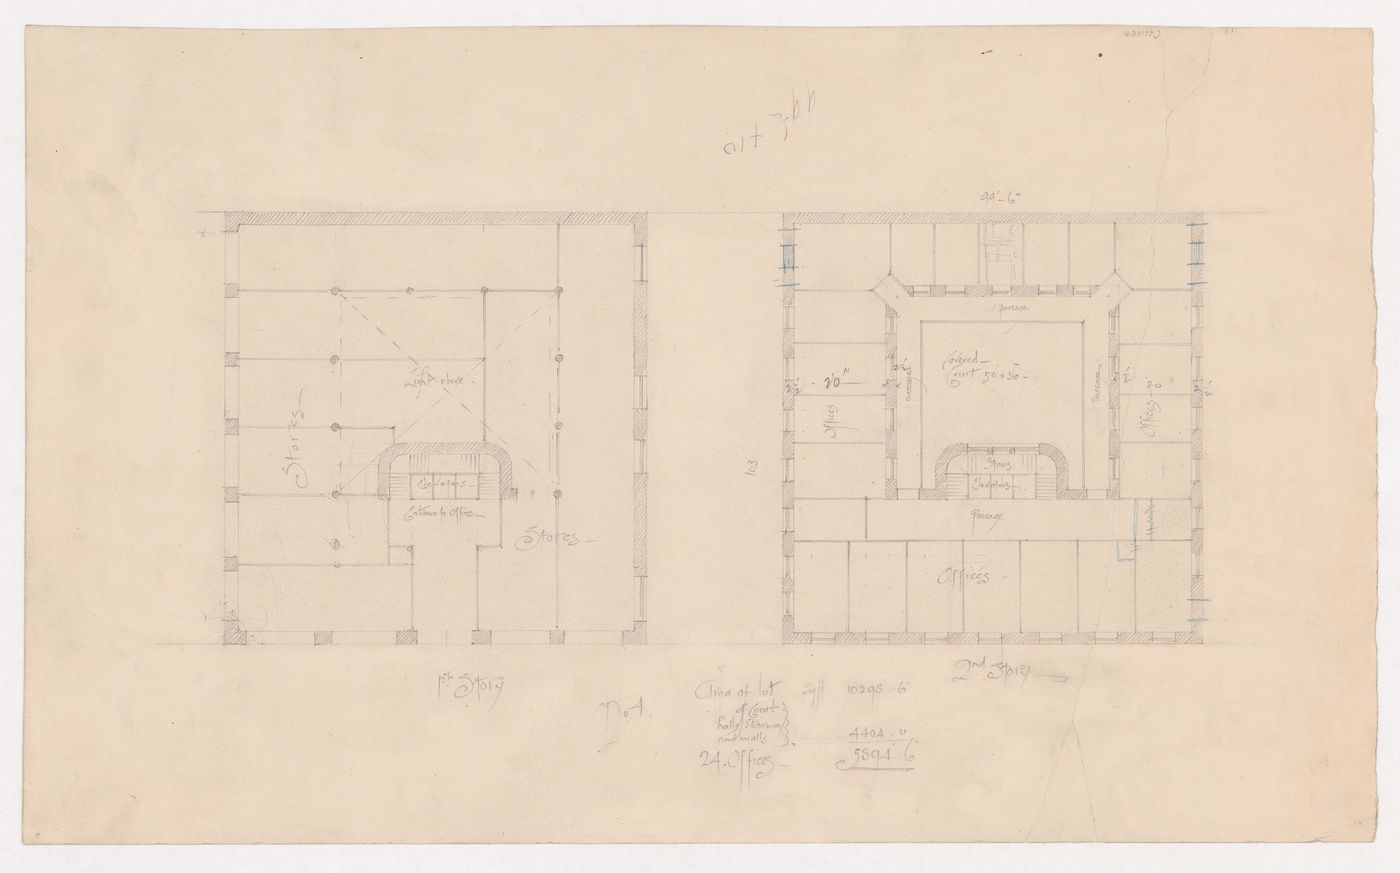 Office building, Chicago: First and second floor plans